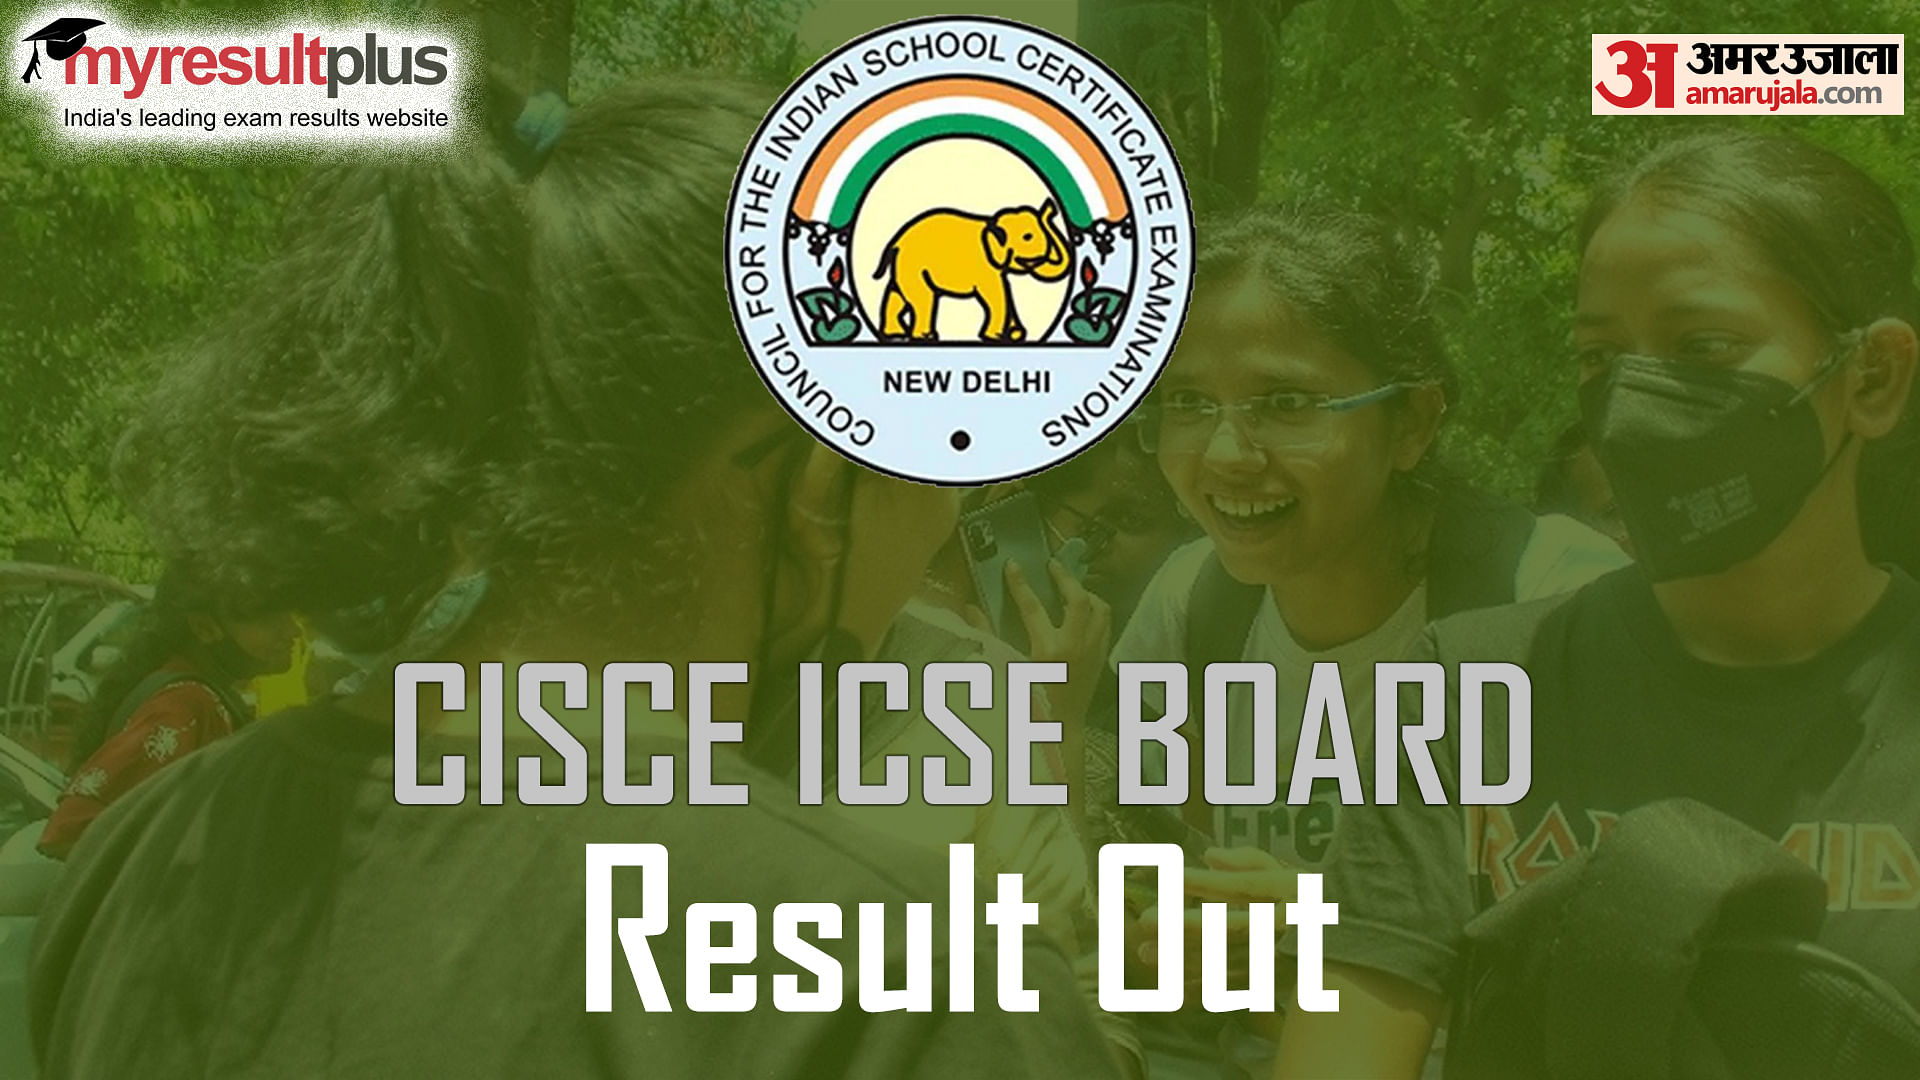 ICSE Class 10 Results Live Updates DECLARED, Pass Percentage Records at 99.97%